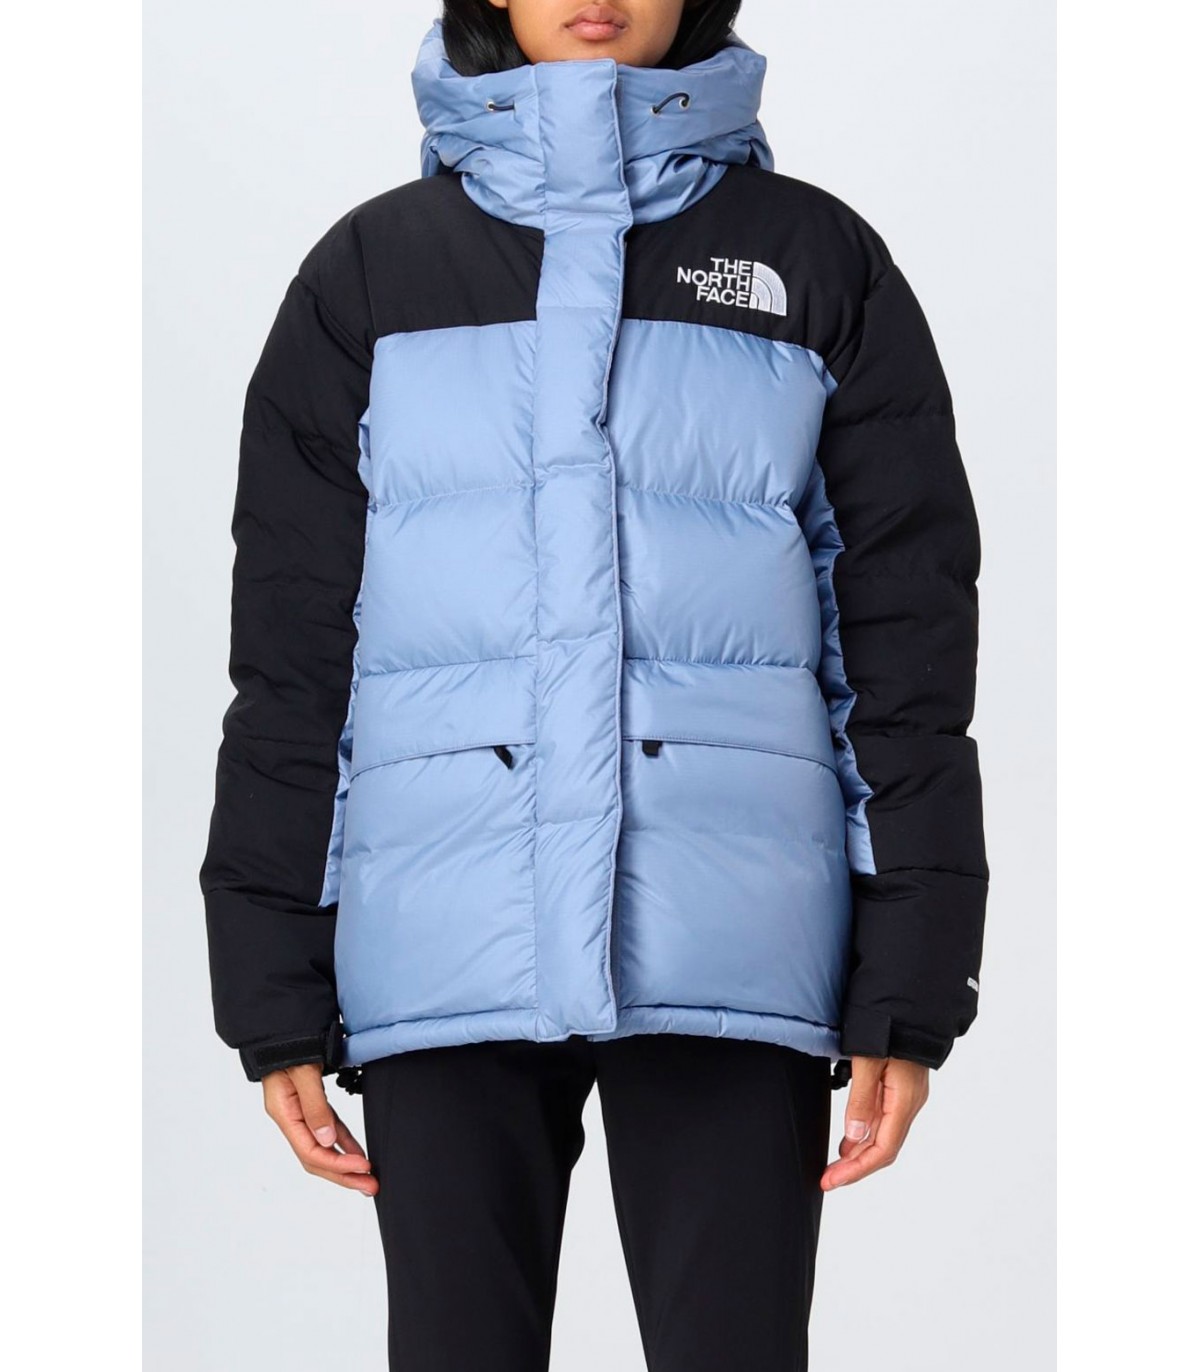 Parka The North Face Plumón y Negro